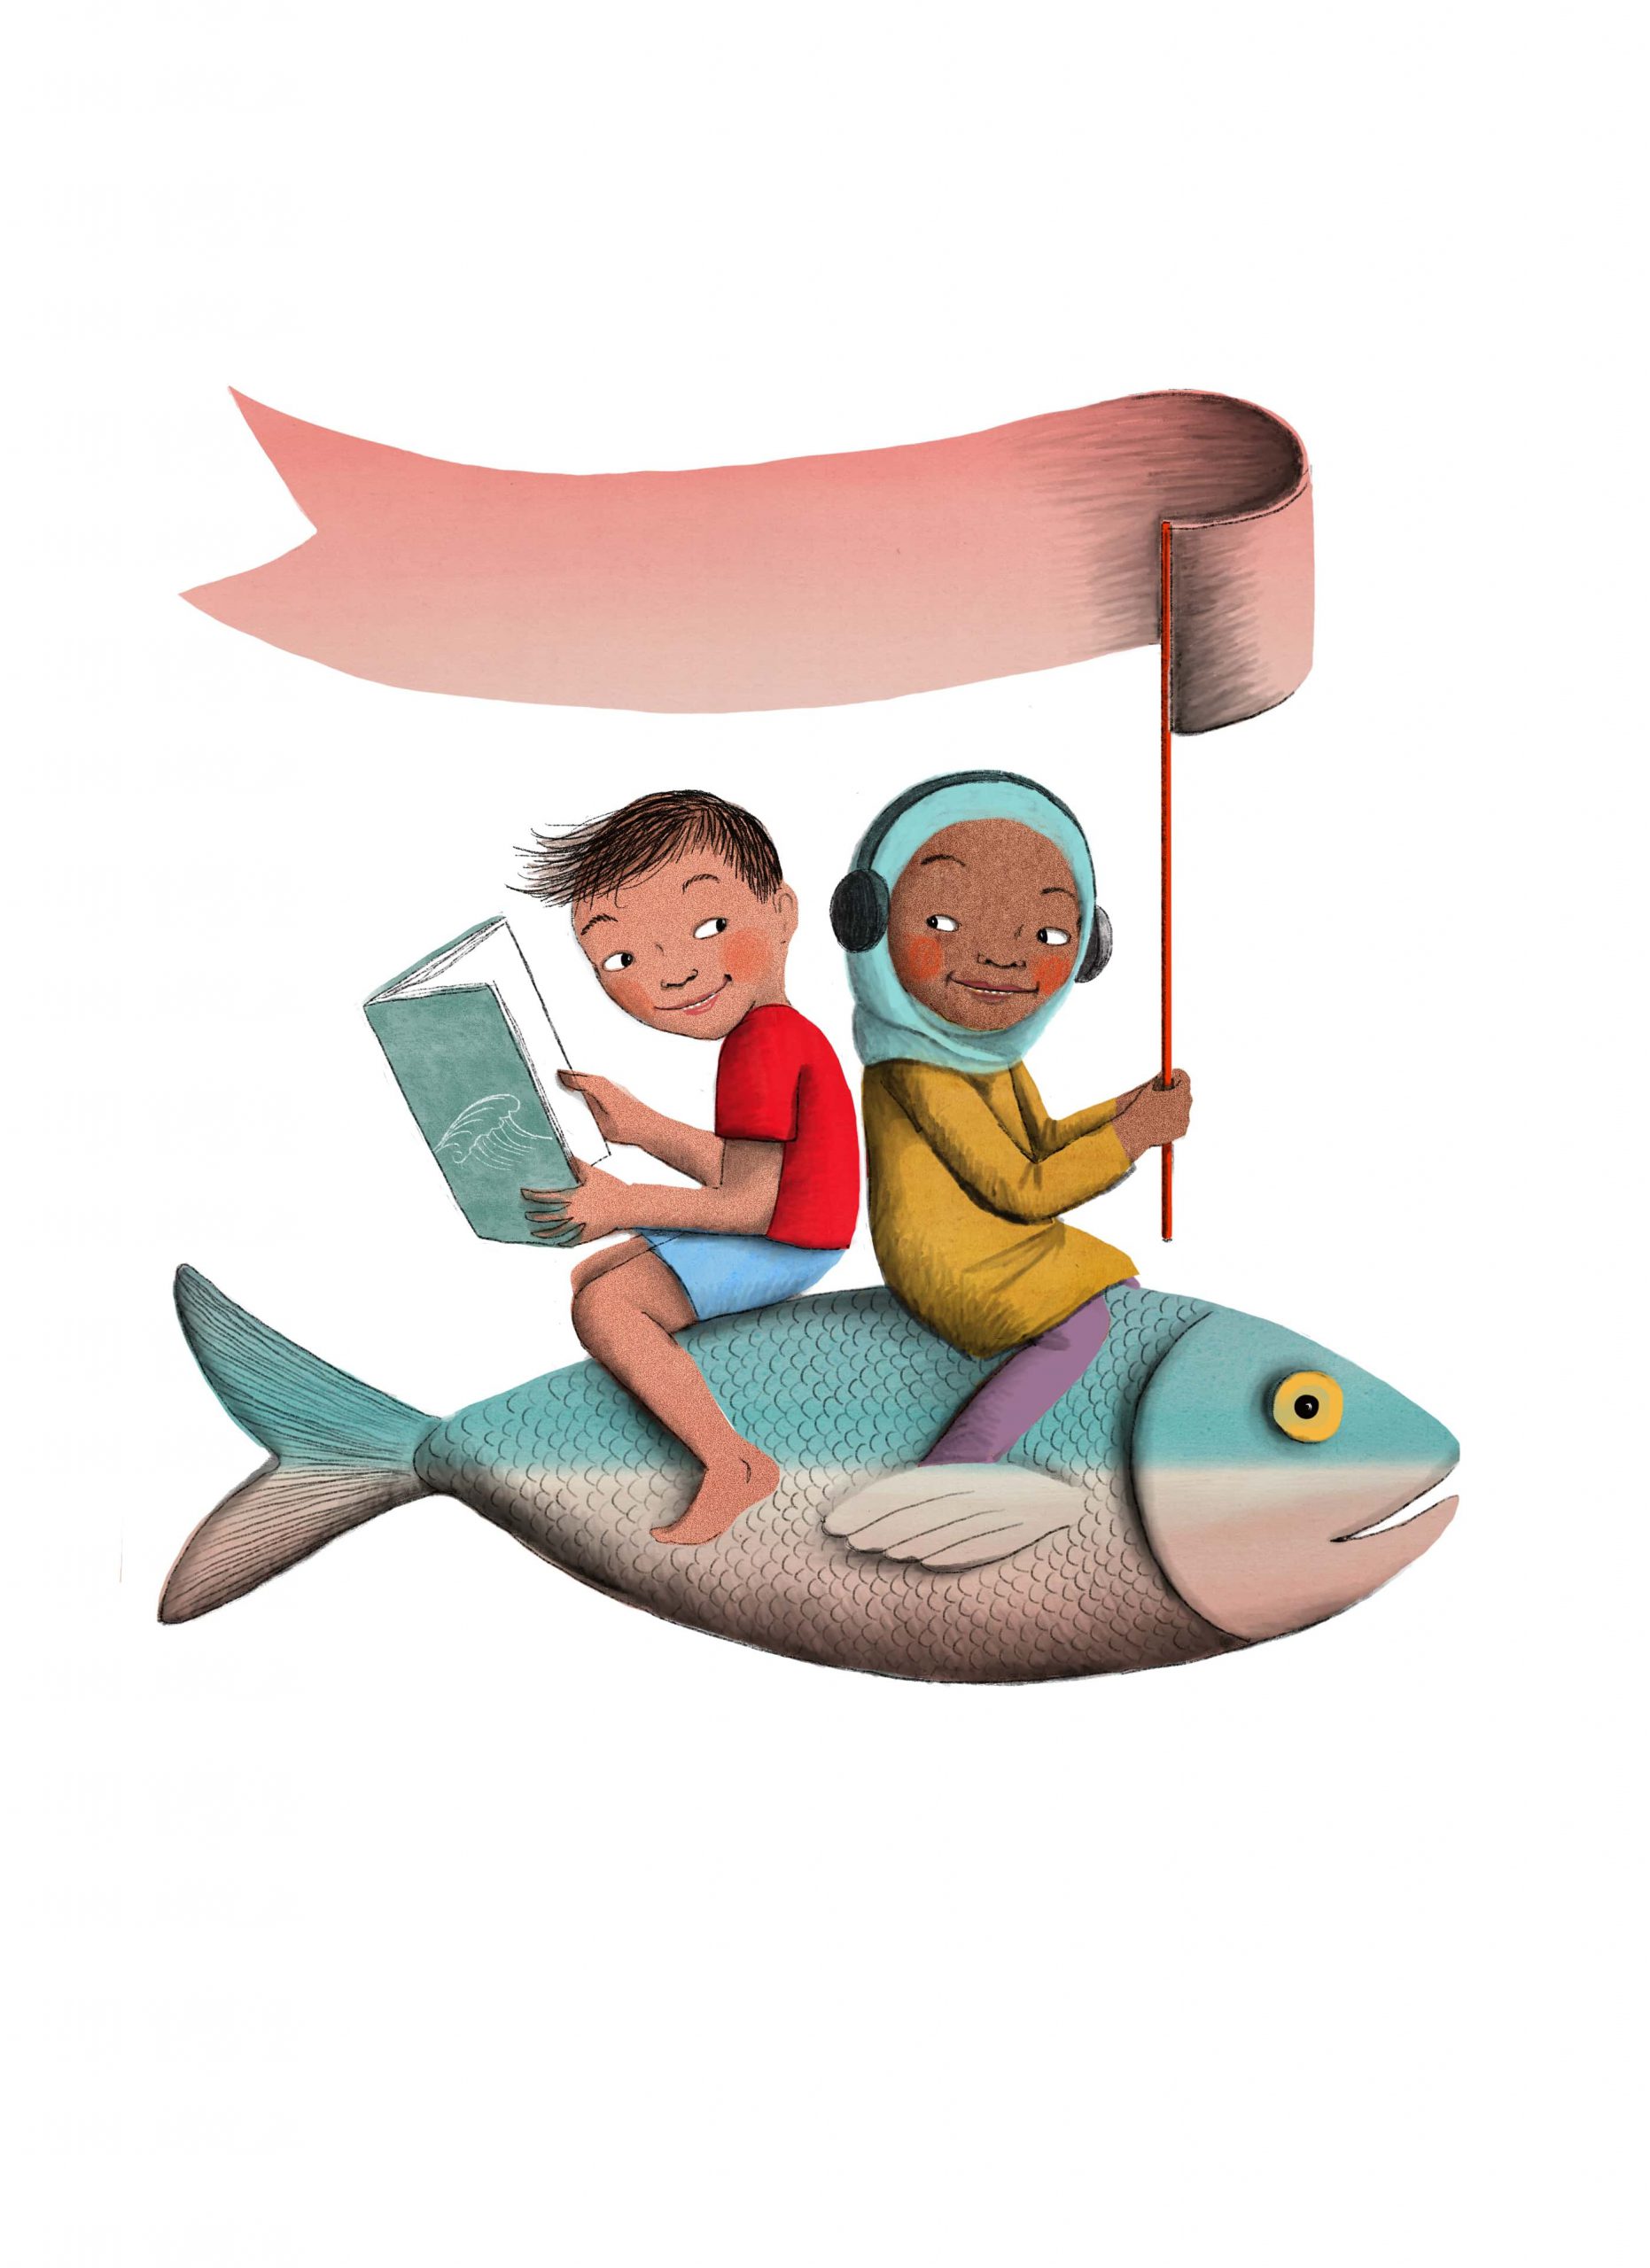 two children riding a fish, one reading a book, one listening with headphones